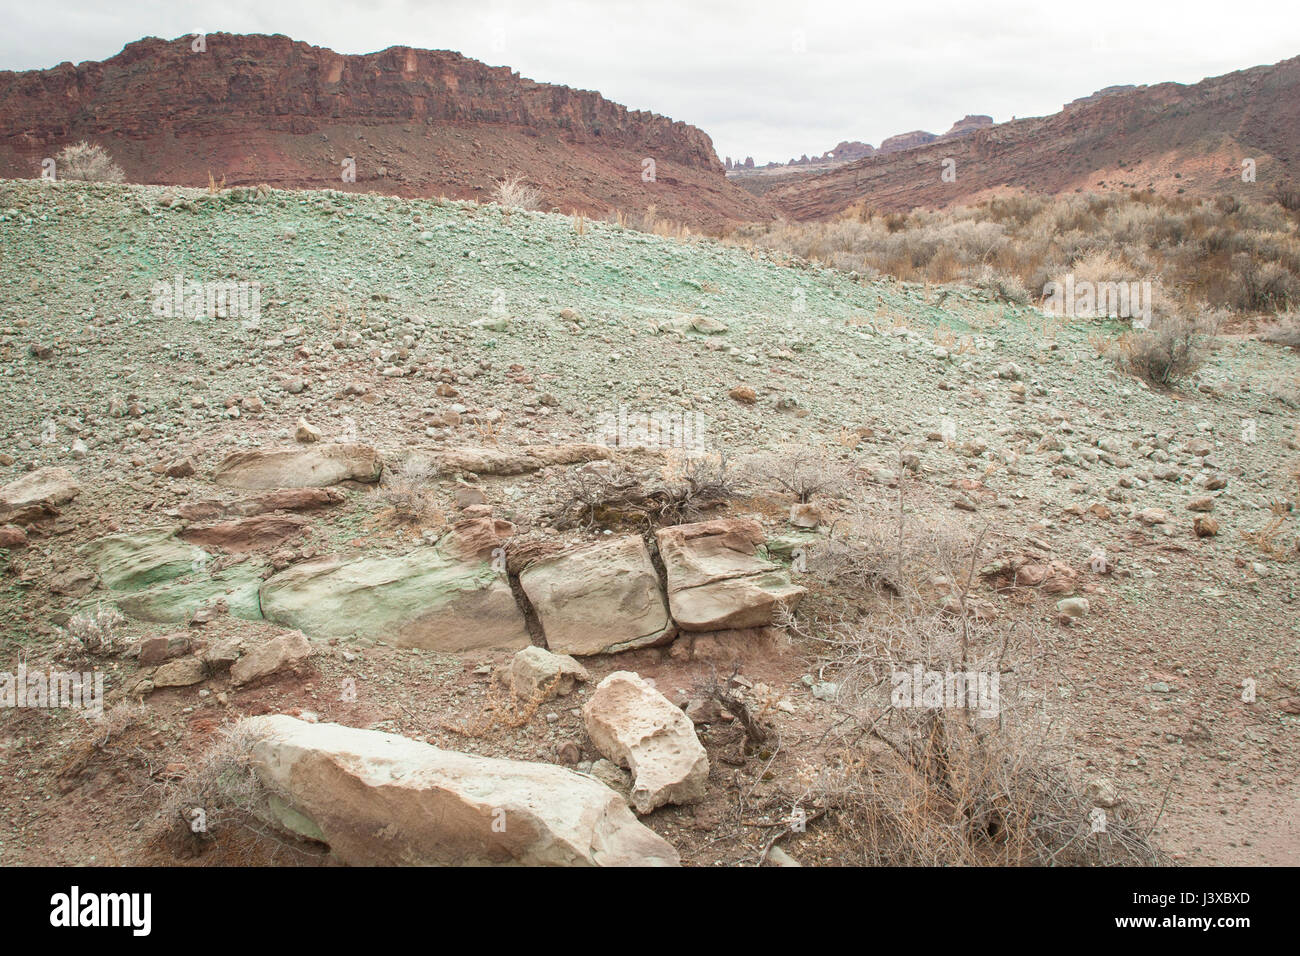 Green serpentine soil in Arches National Park, Utah, USA. Stock Photo